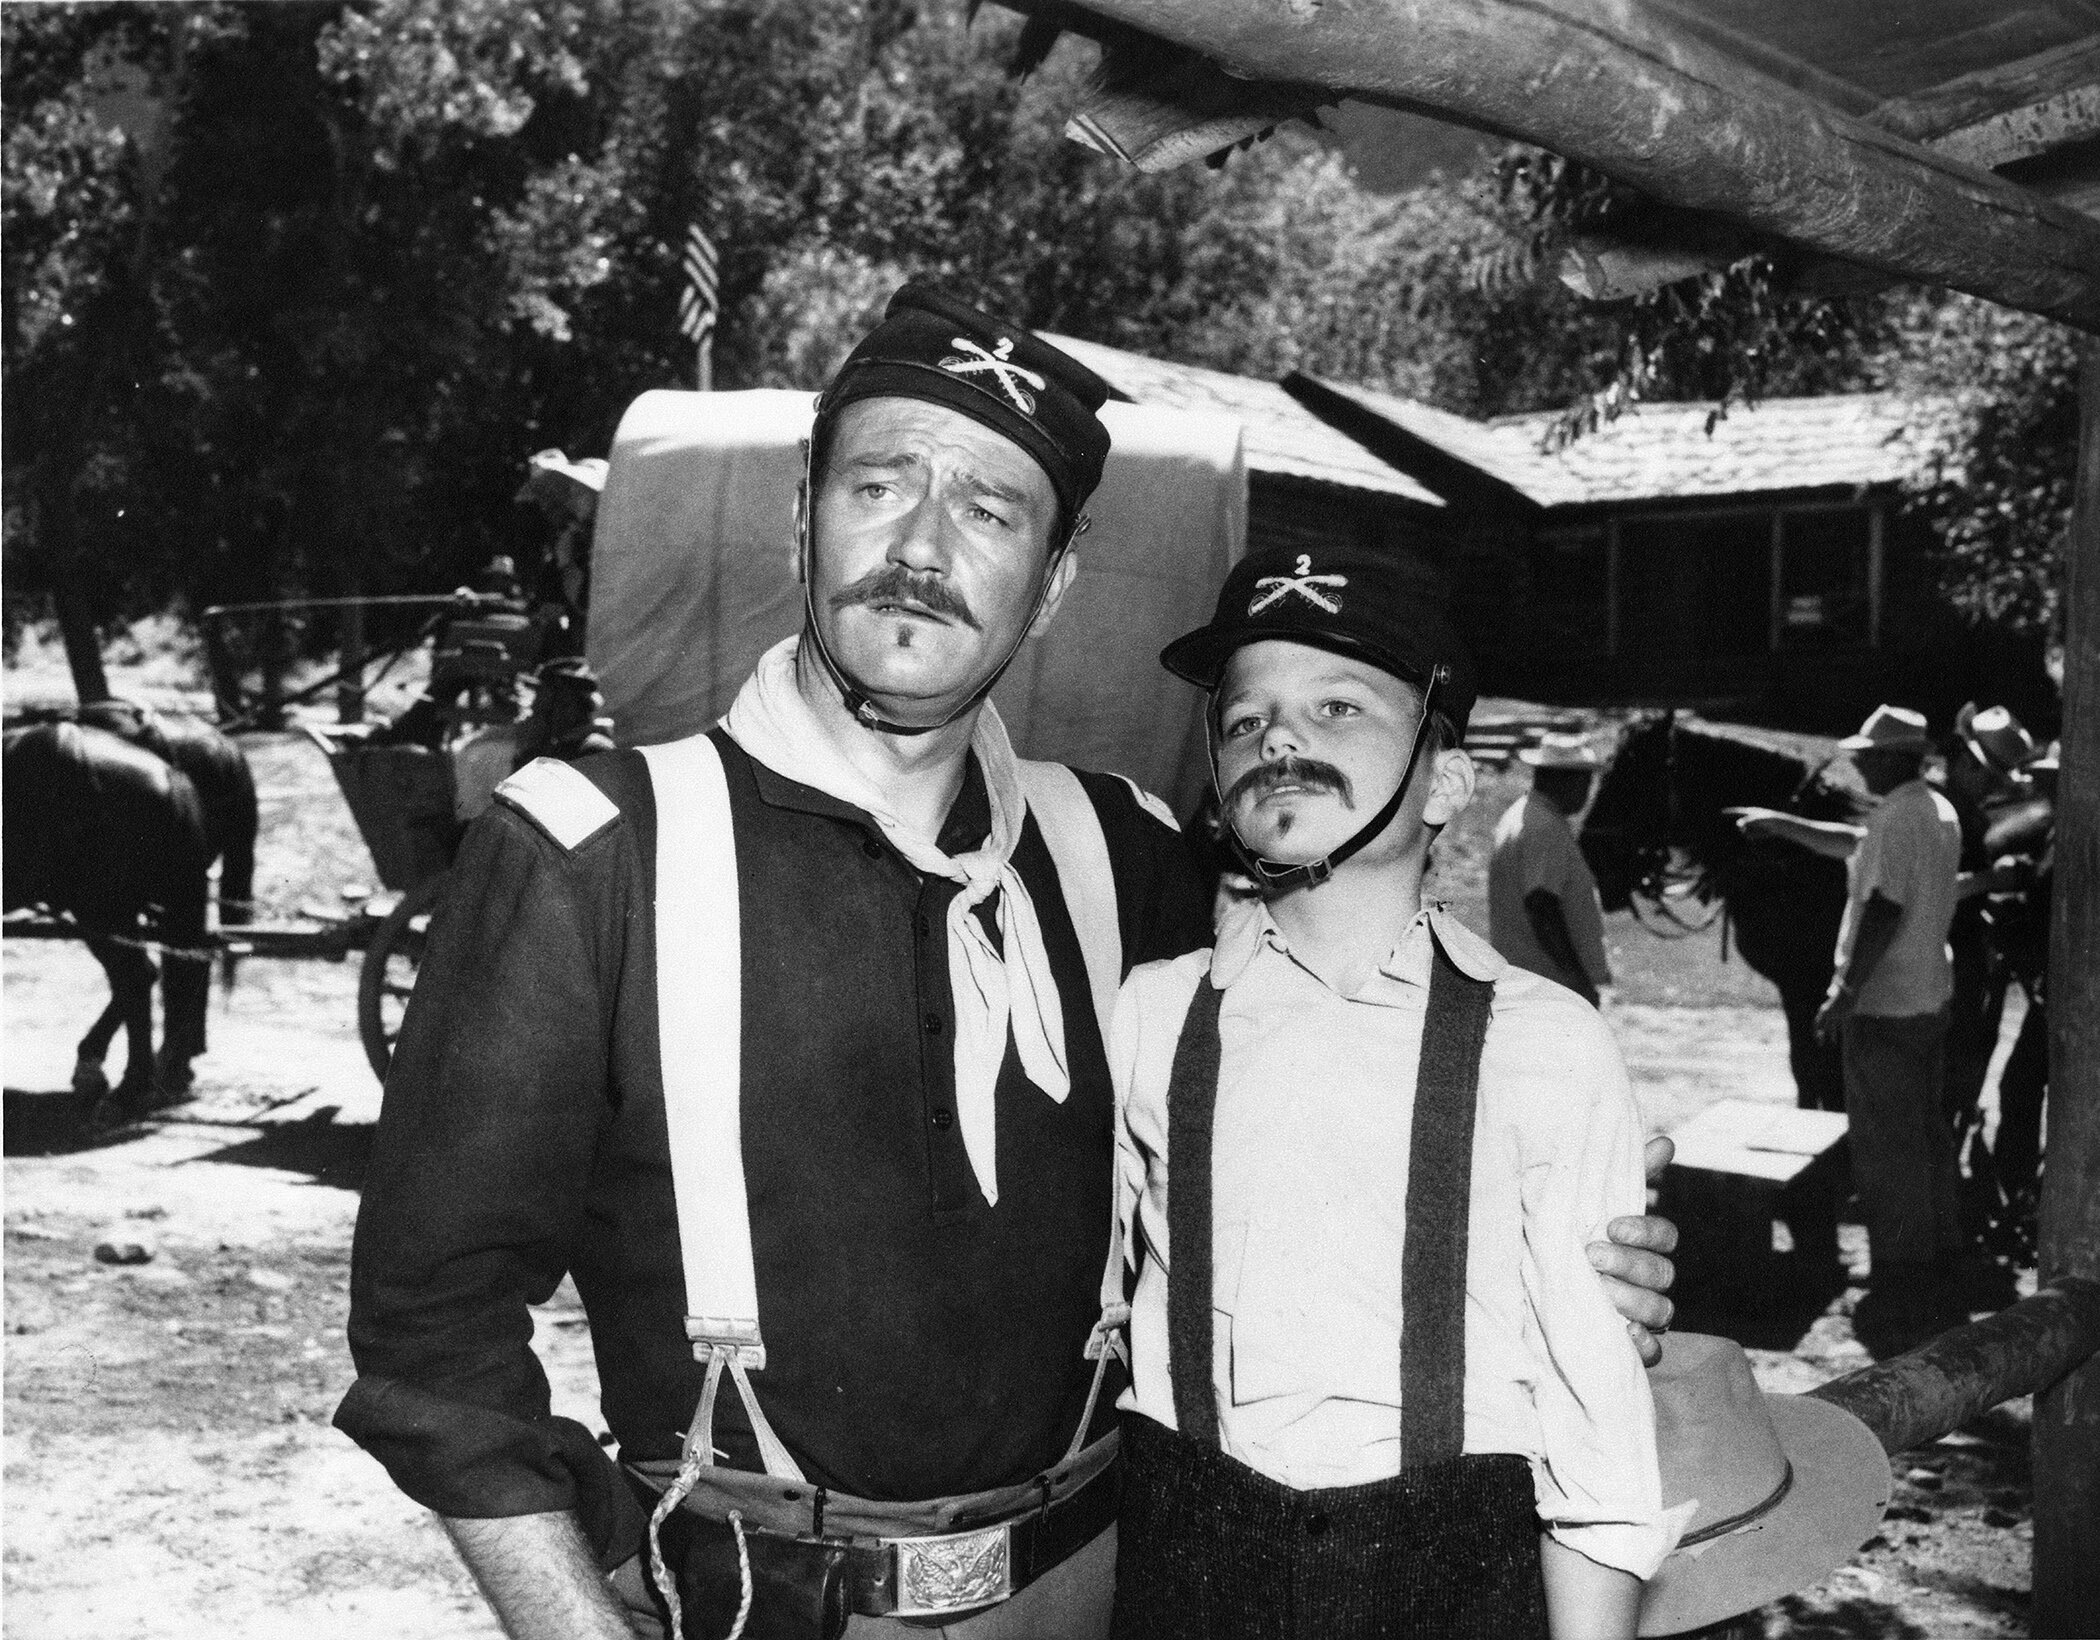 Patrick with his dad on set of the western film Rio Grande (1950).